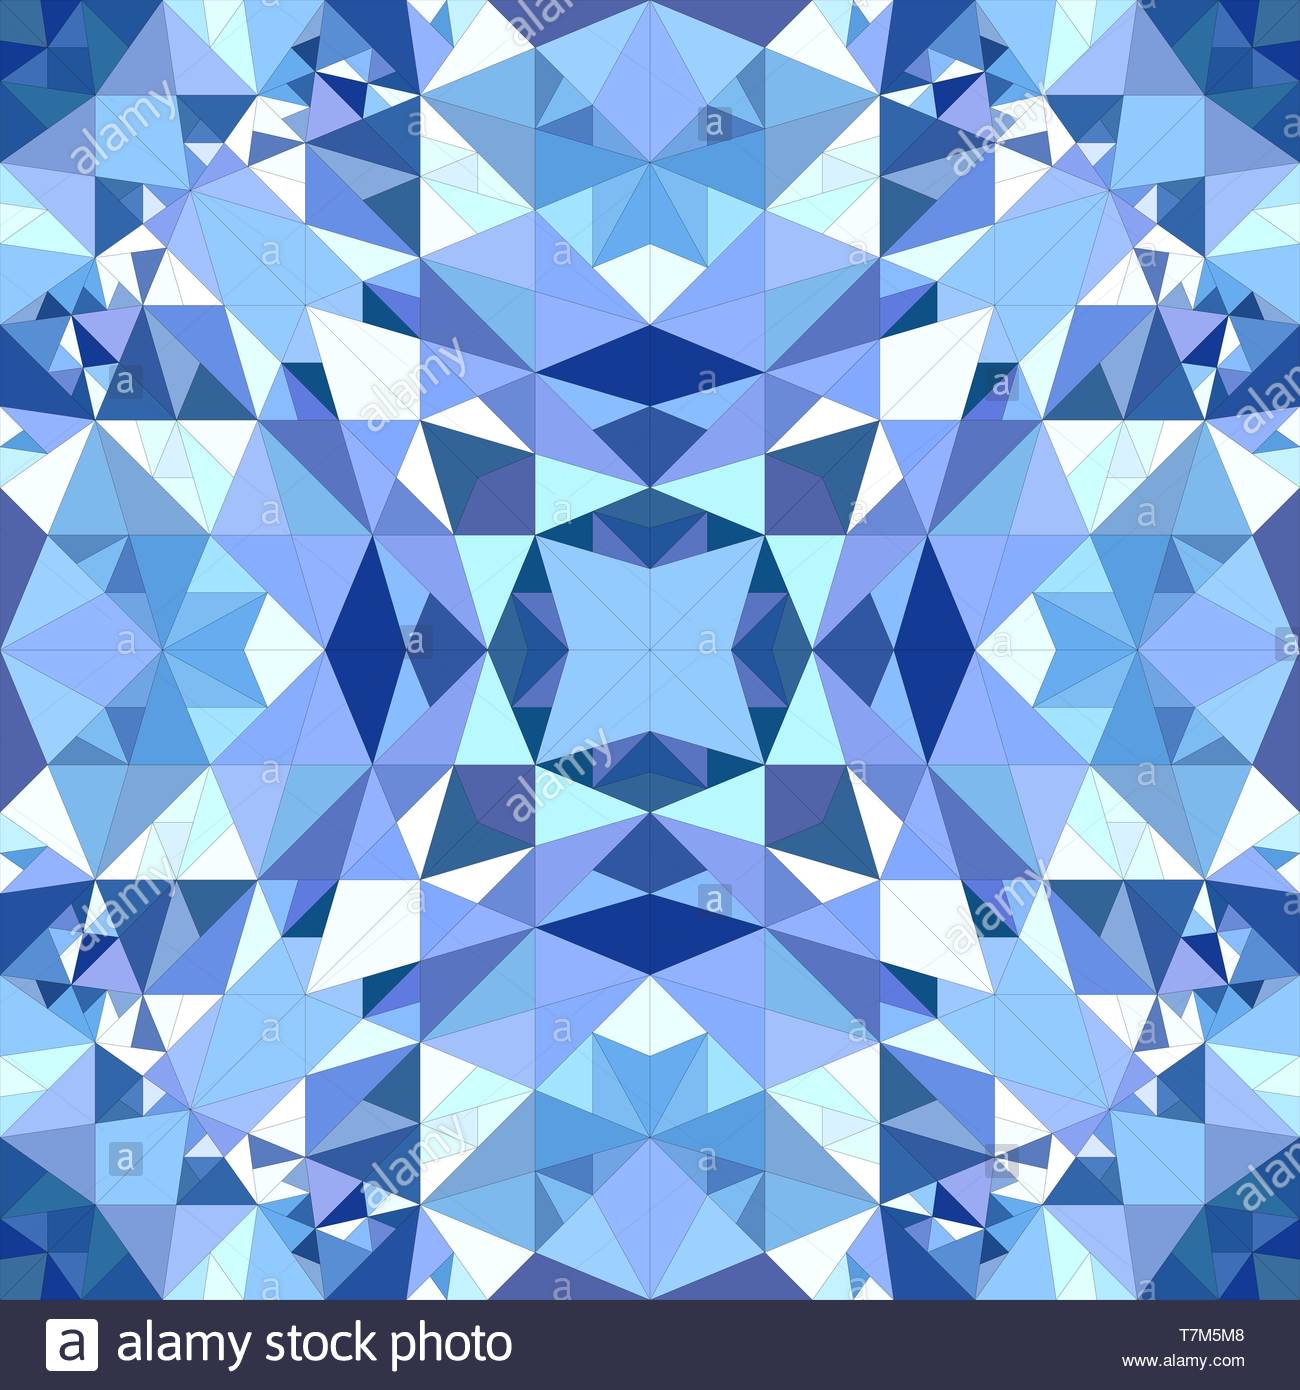 Blue Abstract Repeating Triangle Mosaic Kaleidoscope Wallpaper